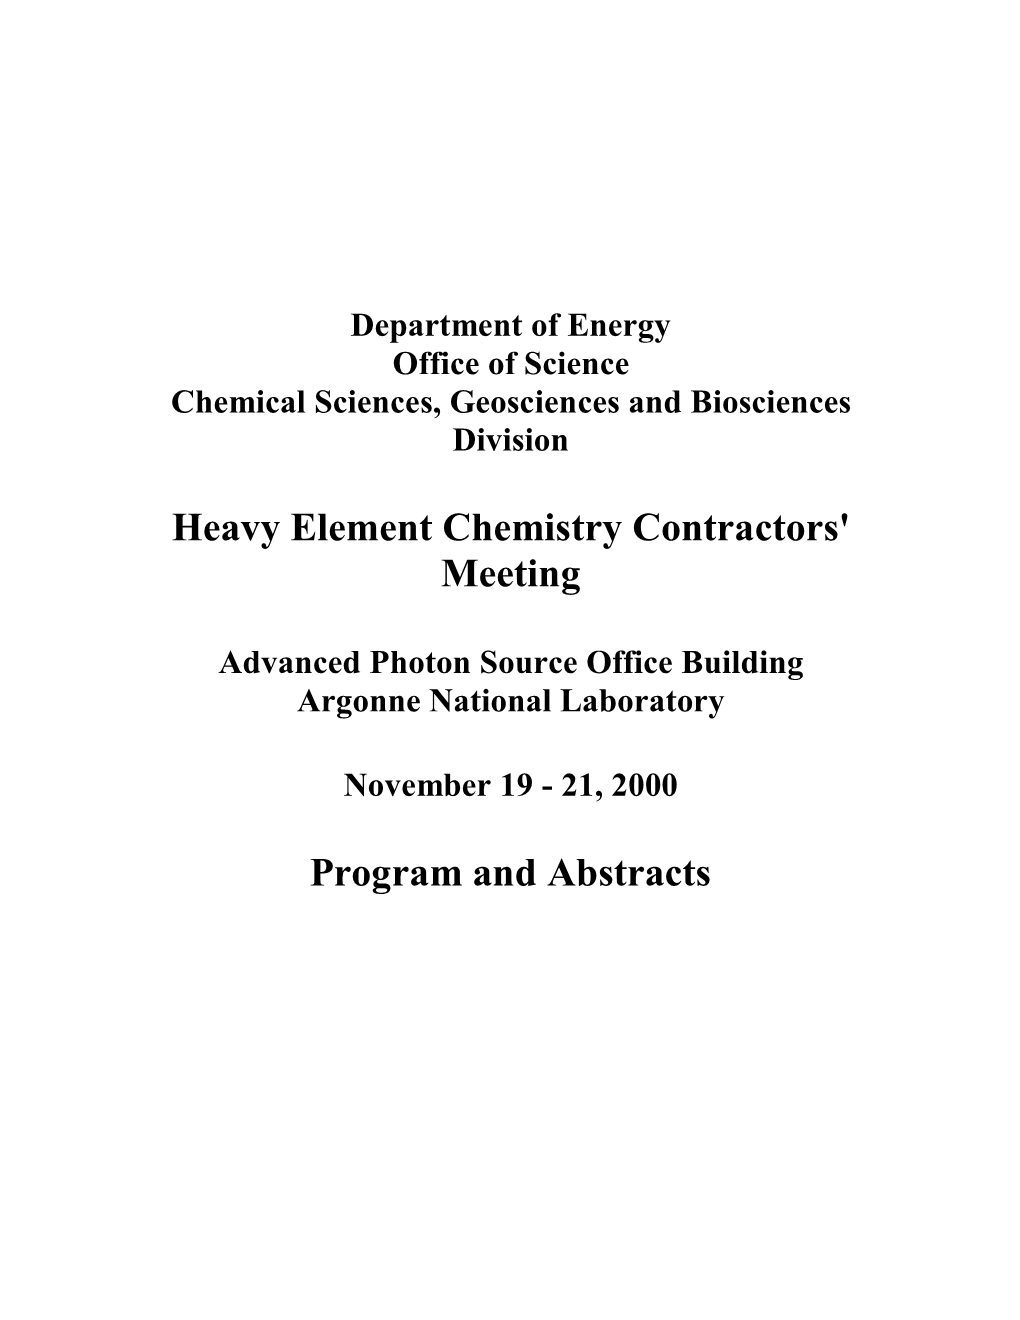 Heavy Element Chemistry Contractors' Meeting Program and Abstracts